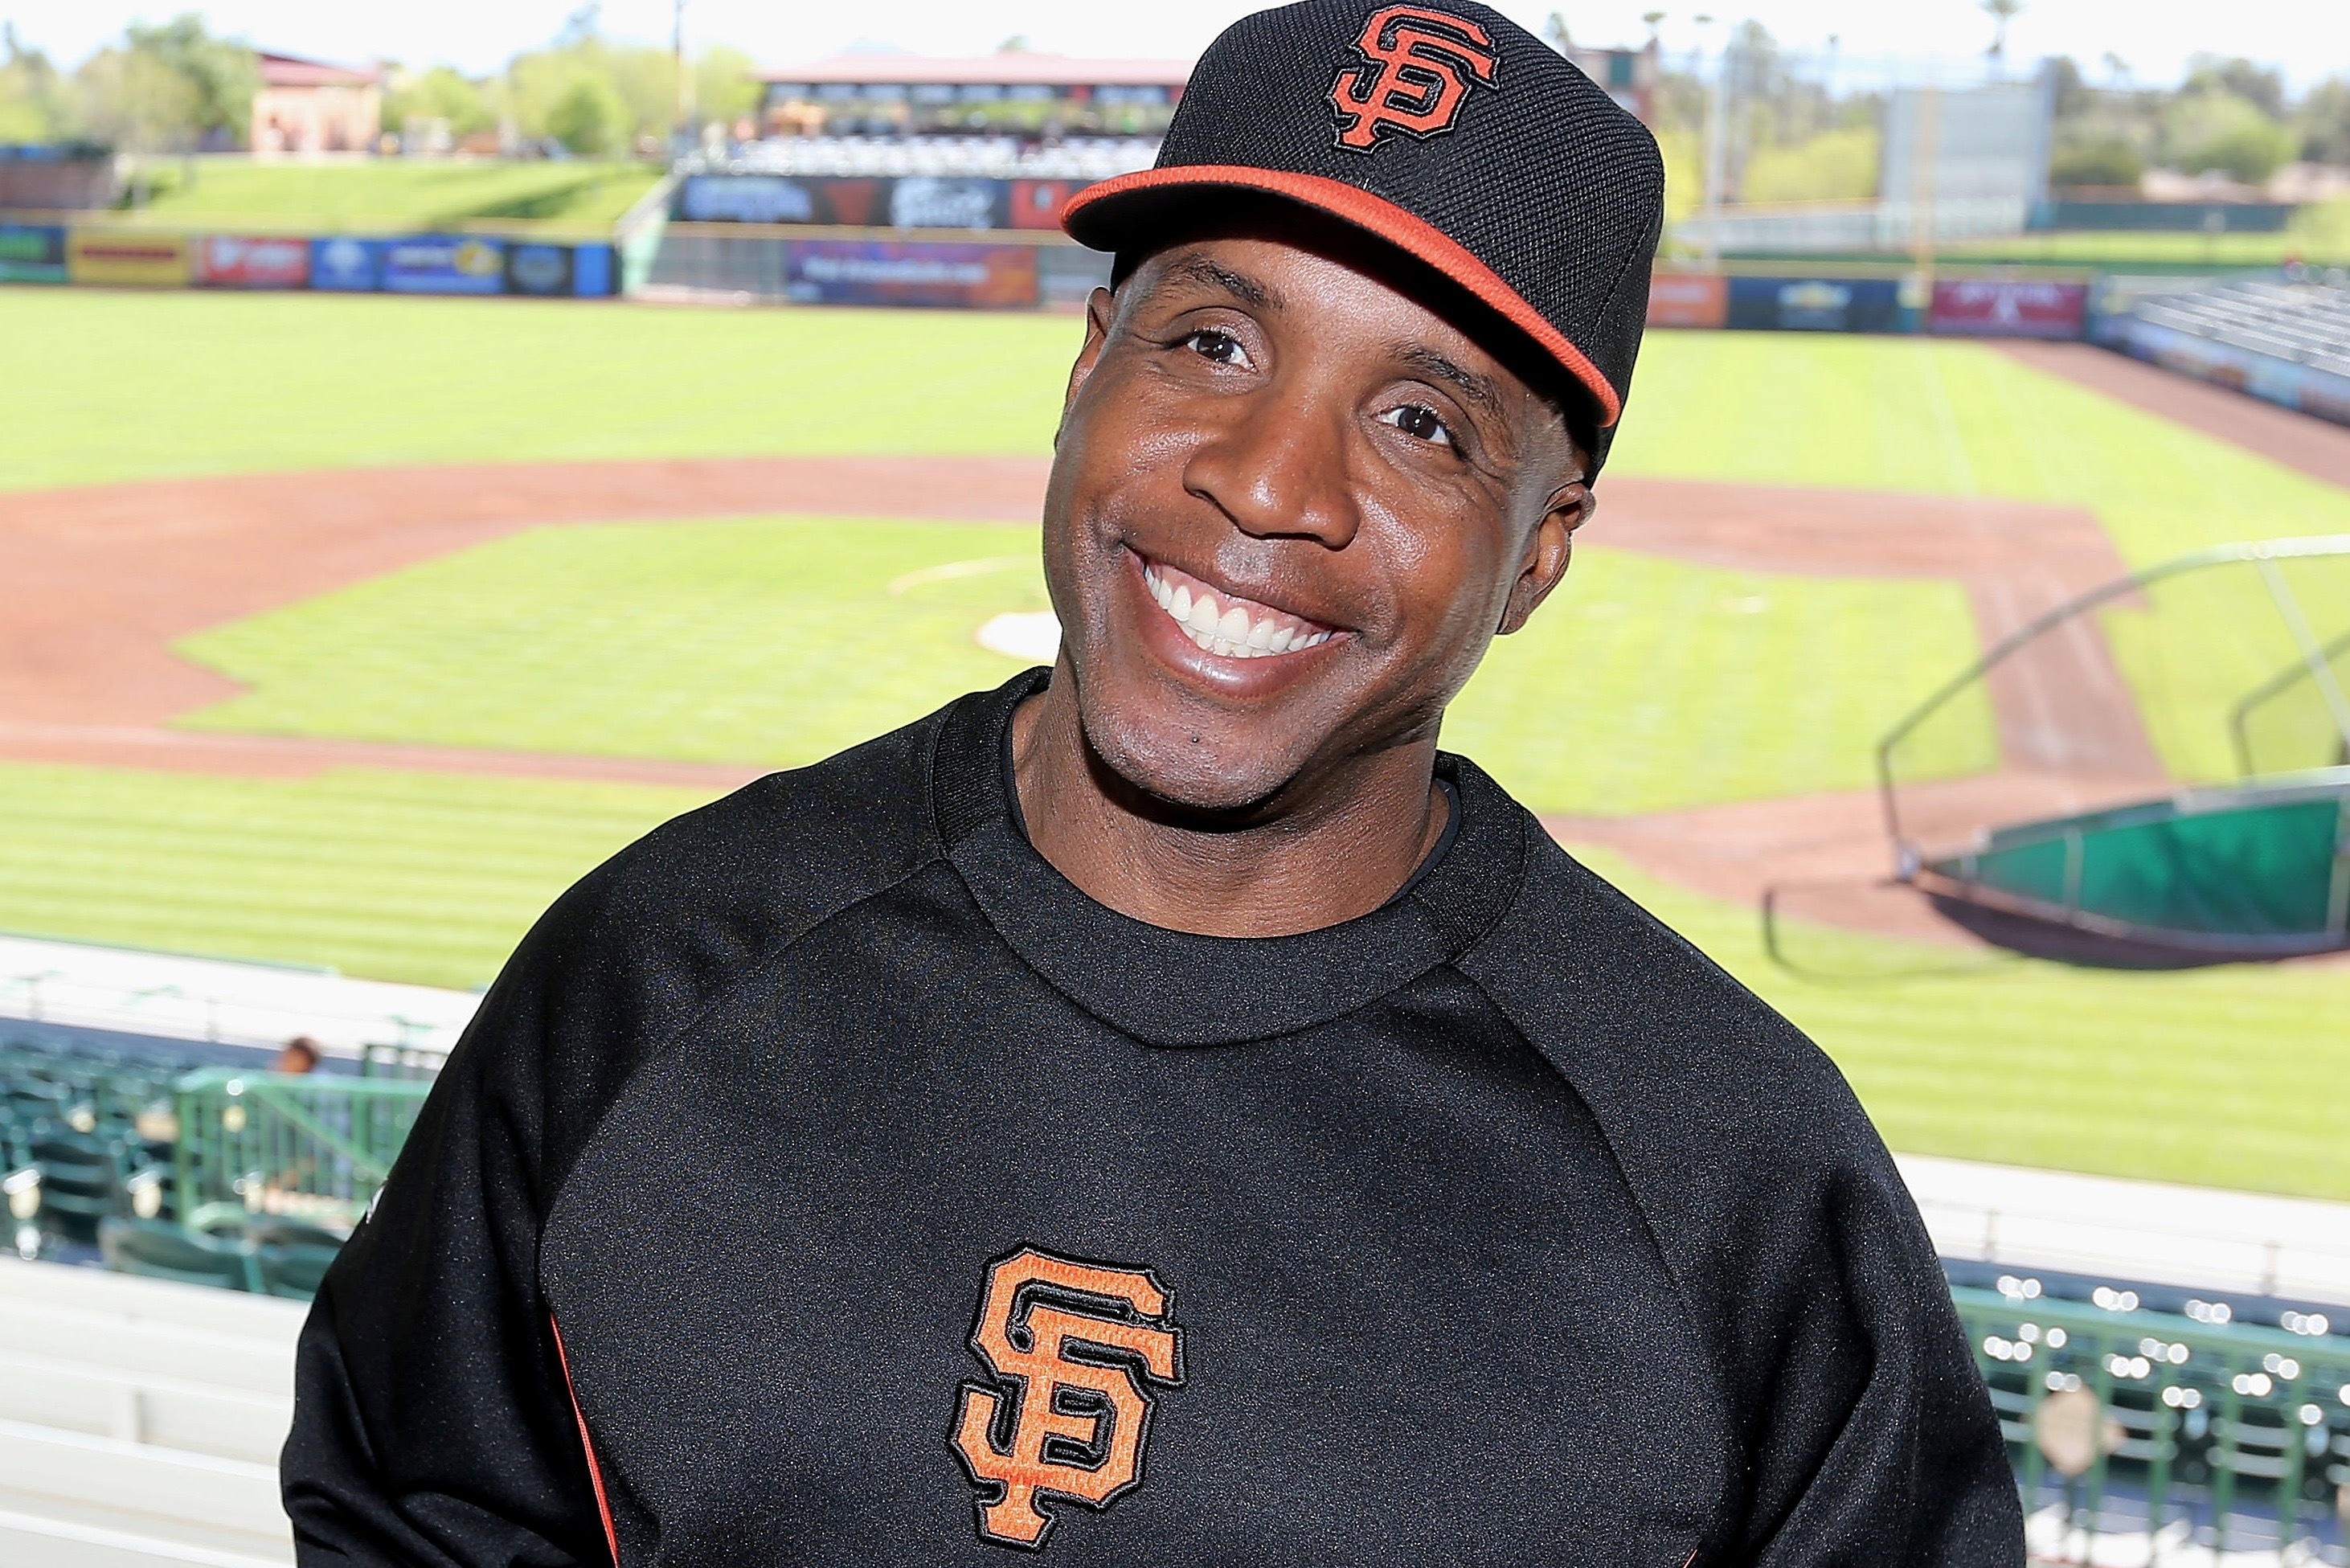 Barry Bonds Will No Longer Be Prosecuted by US Justice Department